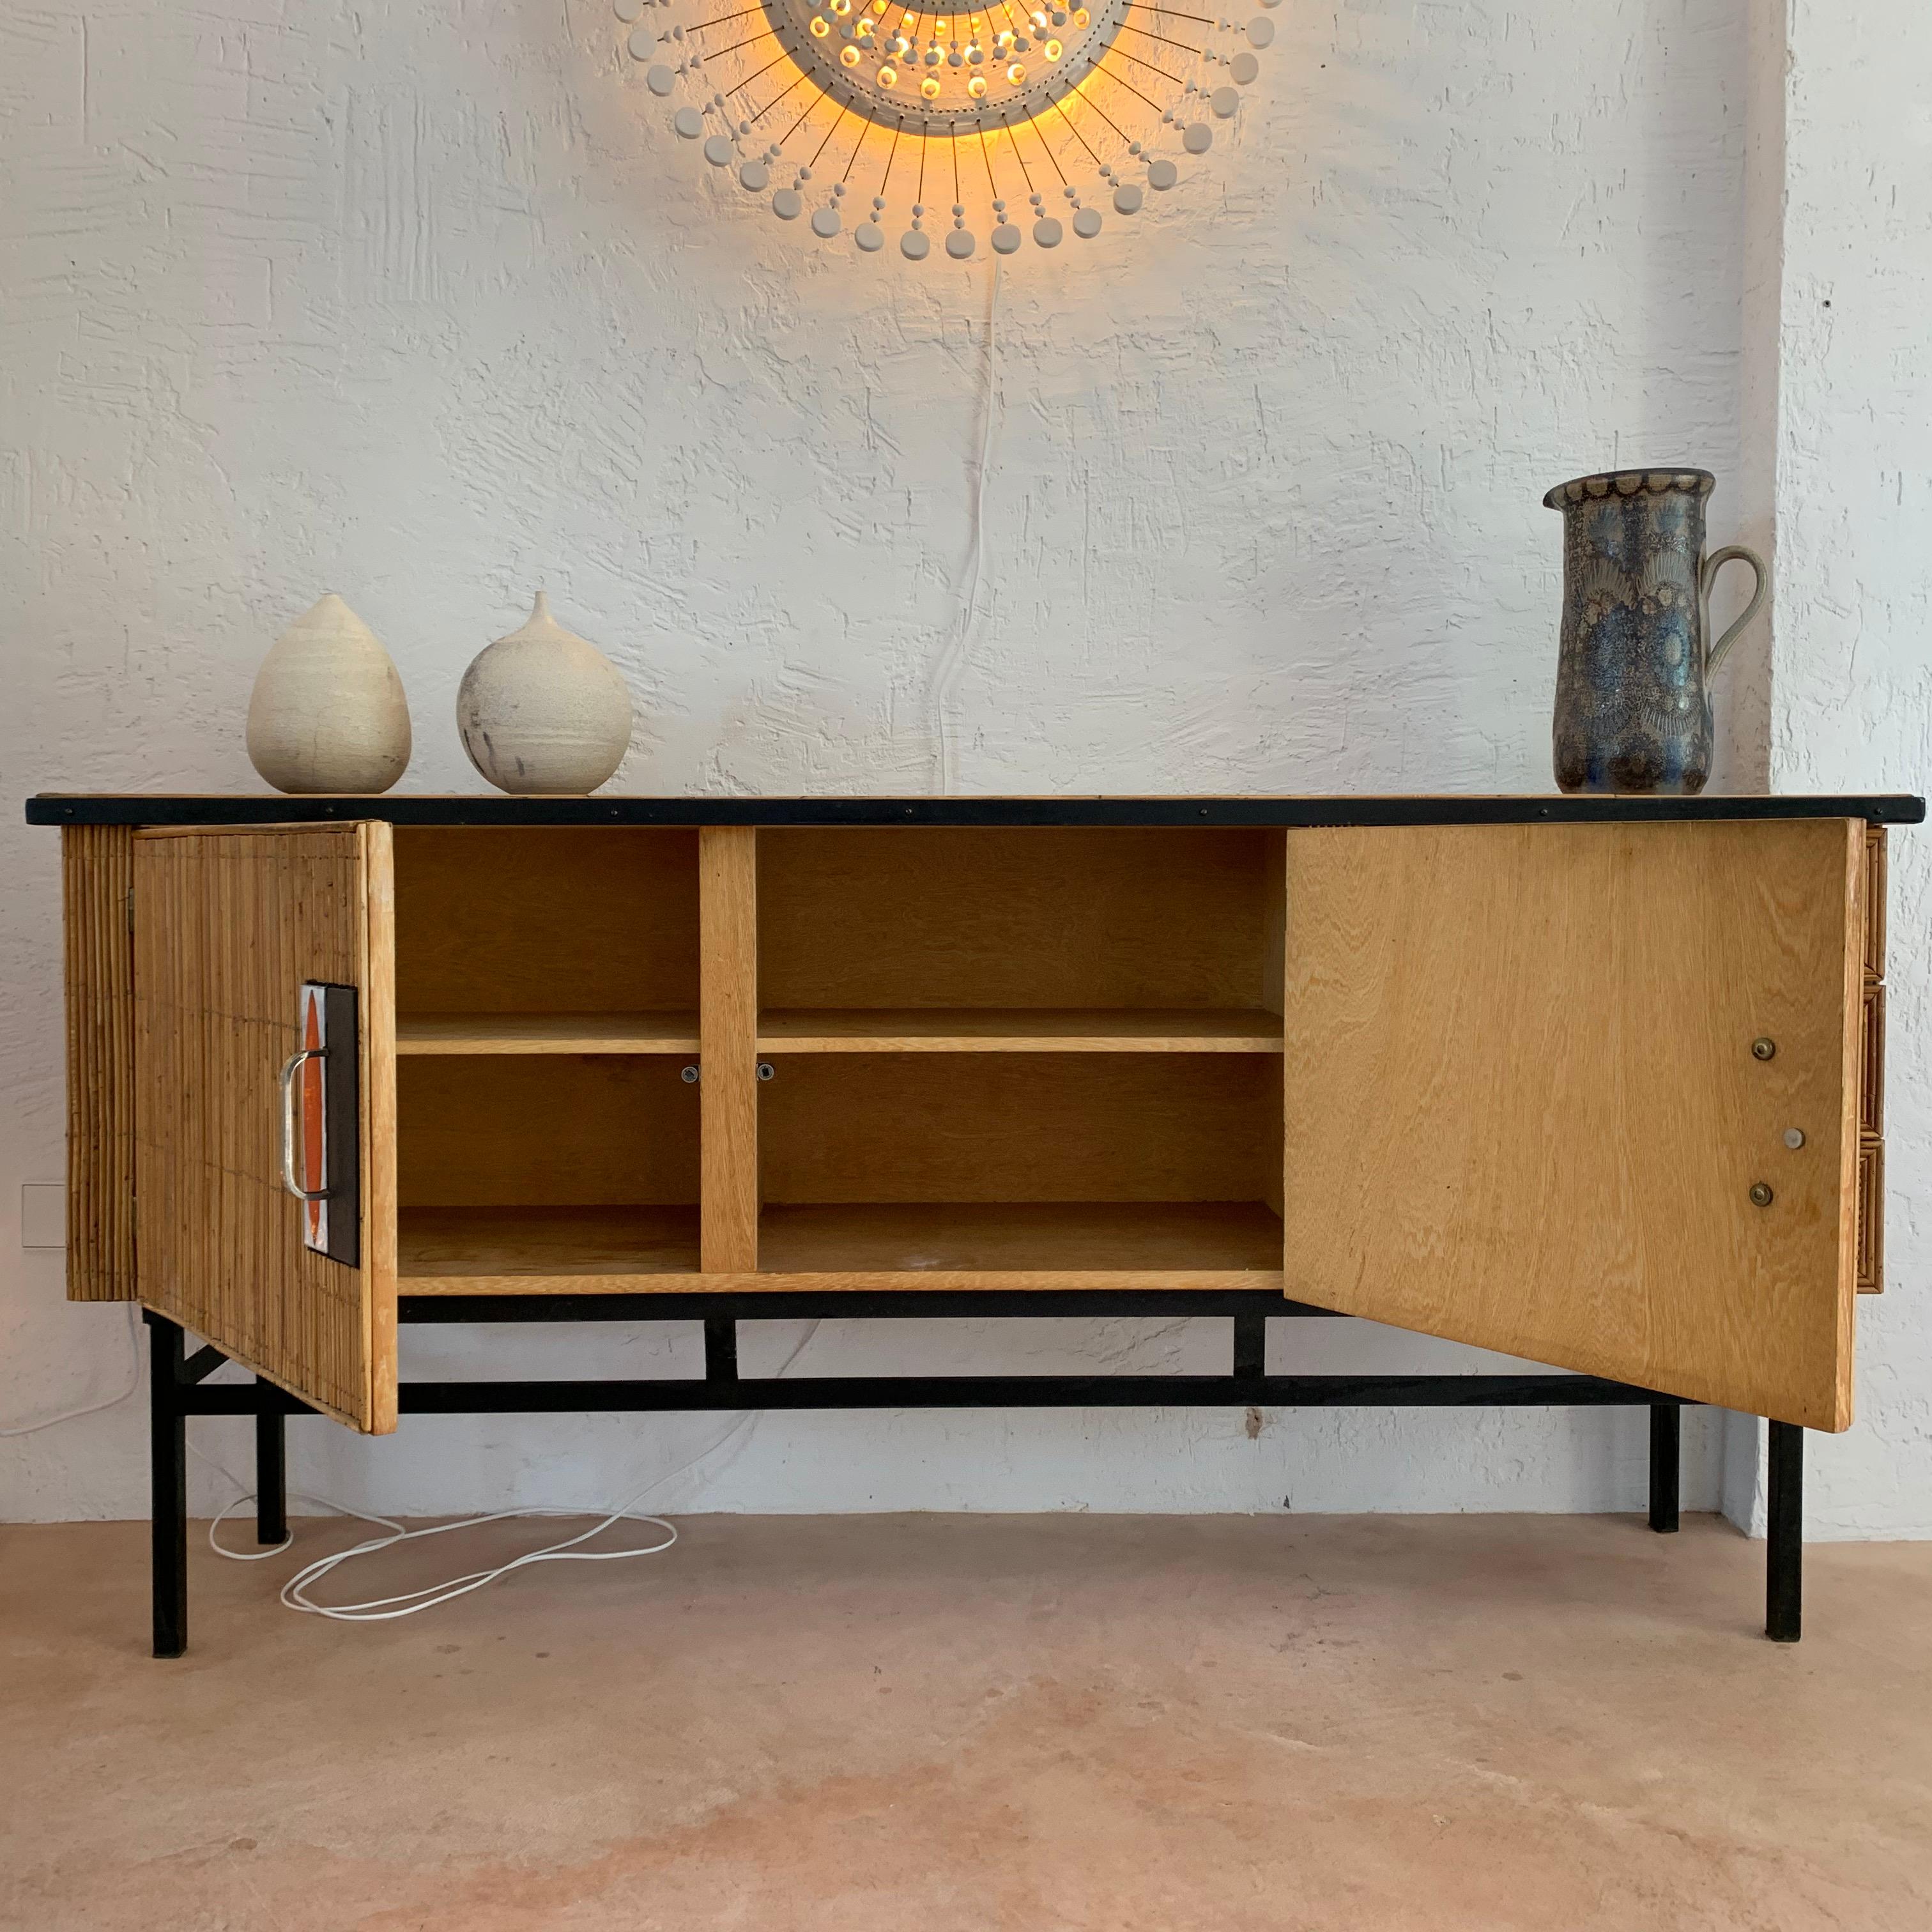 Glazed Audoux & Minet with Roger Capron Ceramic Tiles Sideboard in Rattan & metal, 1950